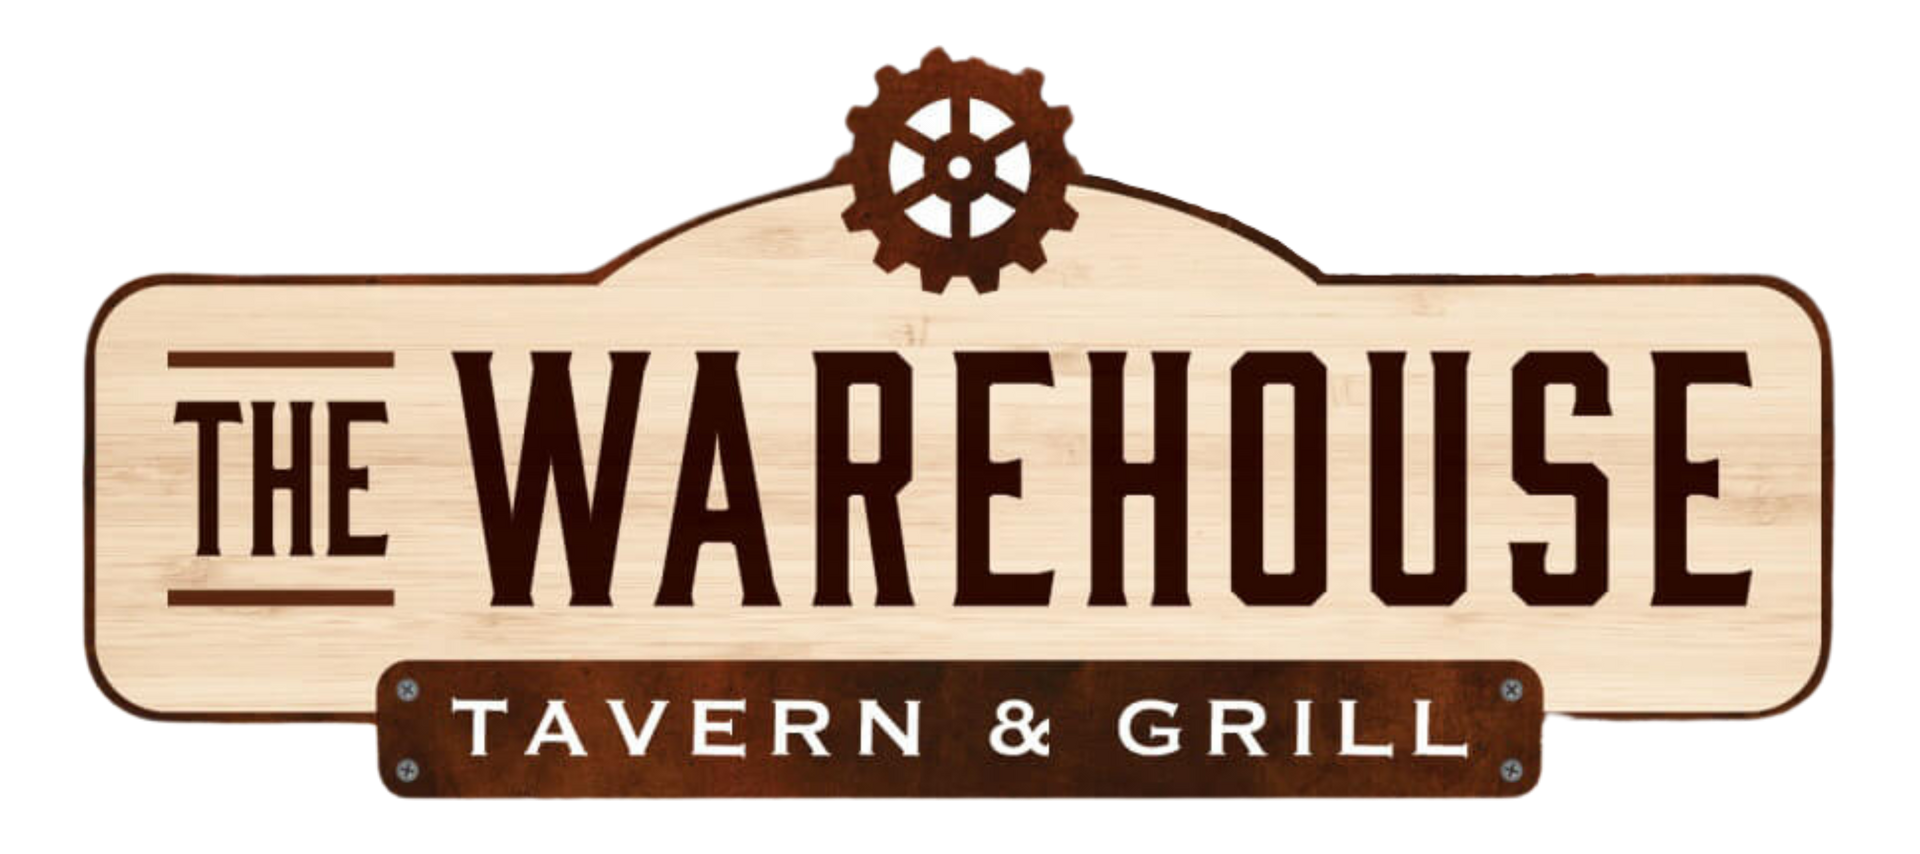 The logo for the warehouse tavern and grill near adventure sports